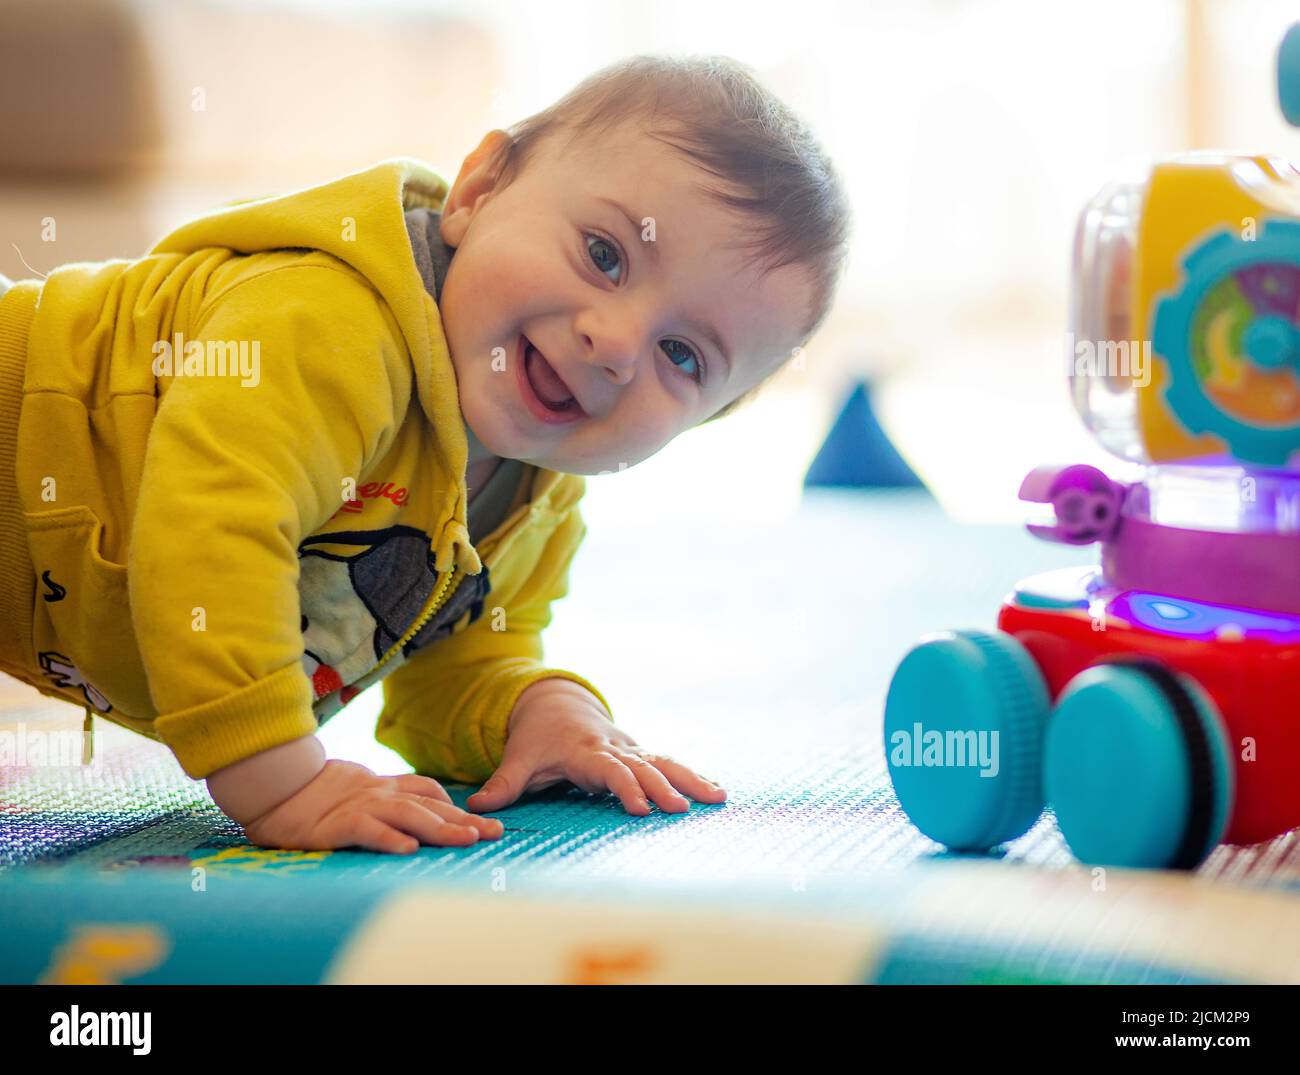 A few months old baby plays smiling on a soft carpet together with his toys. Stock Photo